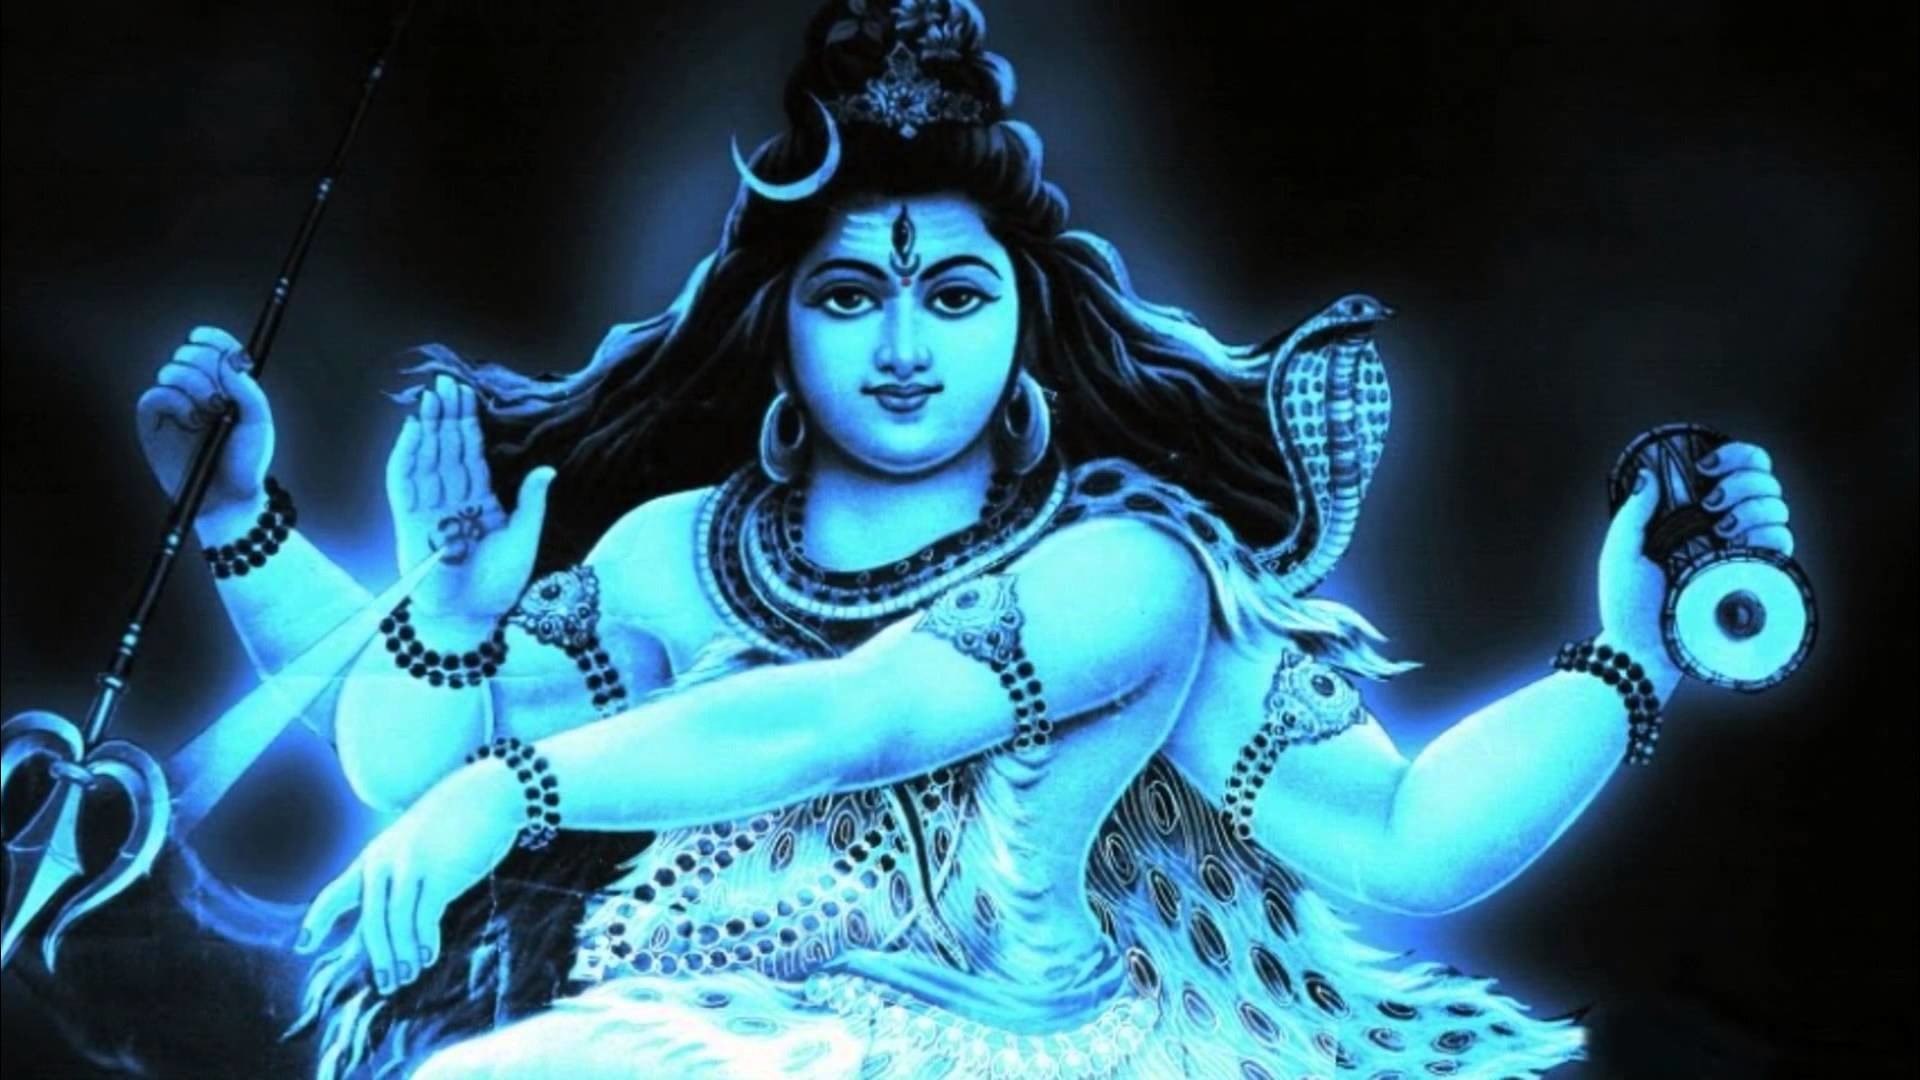 My Lord Shiva Live Wallpaper for Android Free Download on MoboMarket